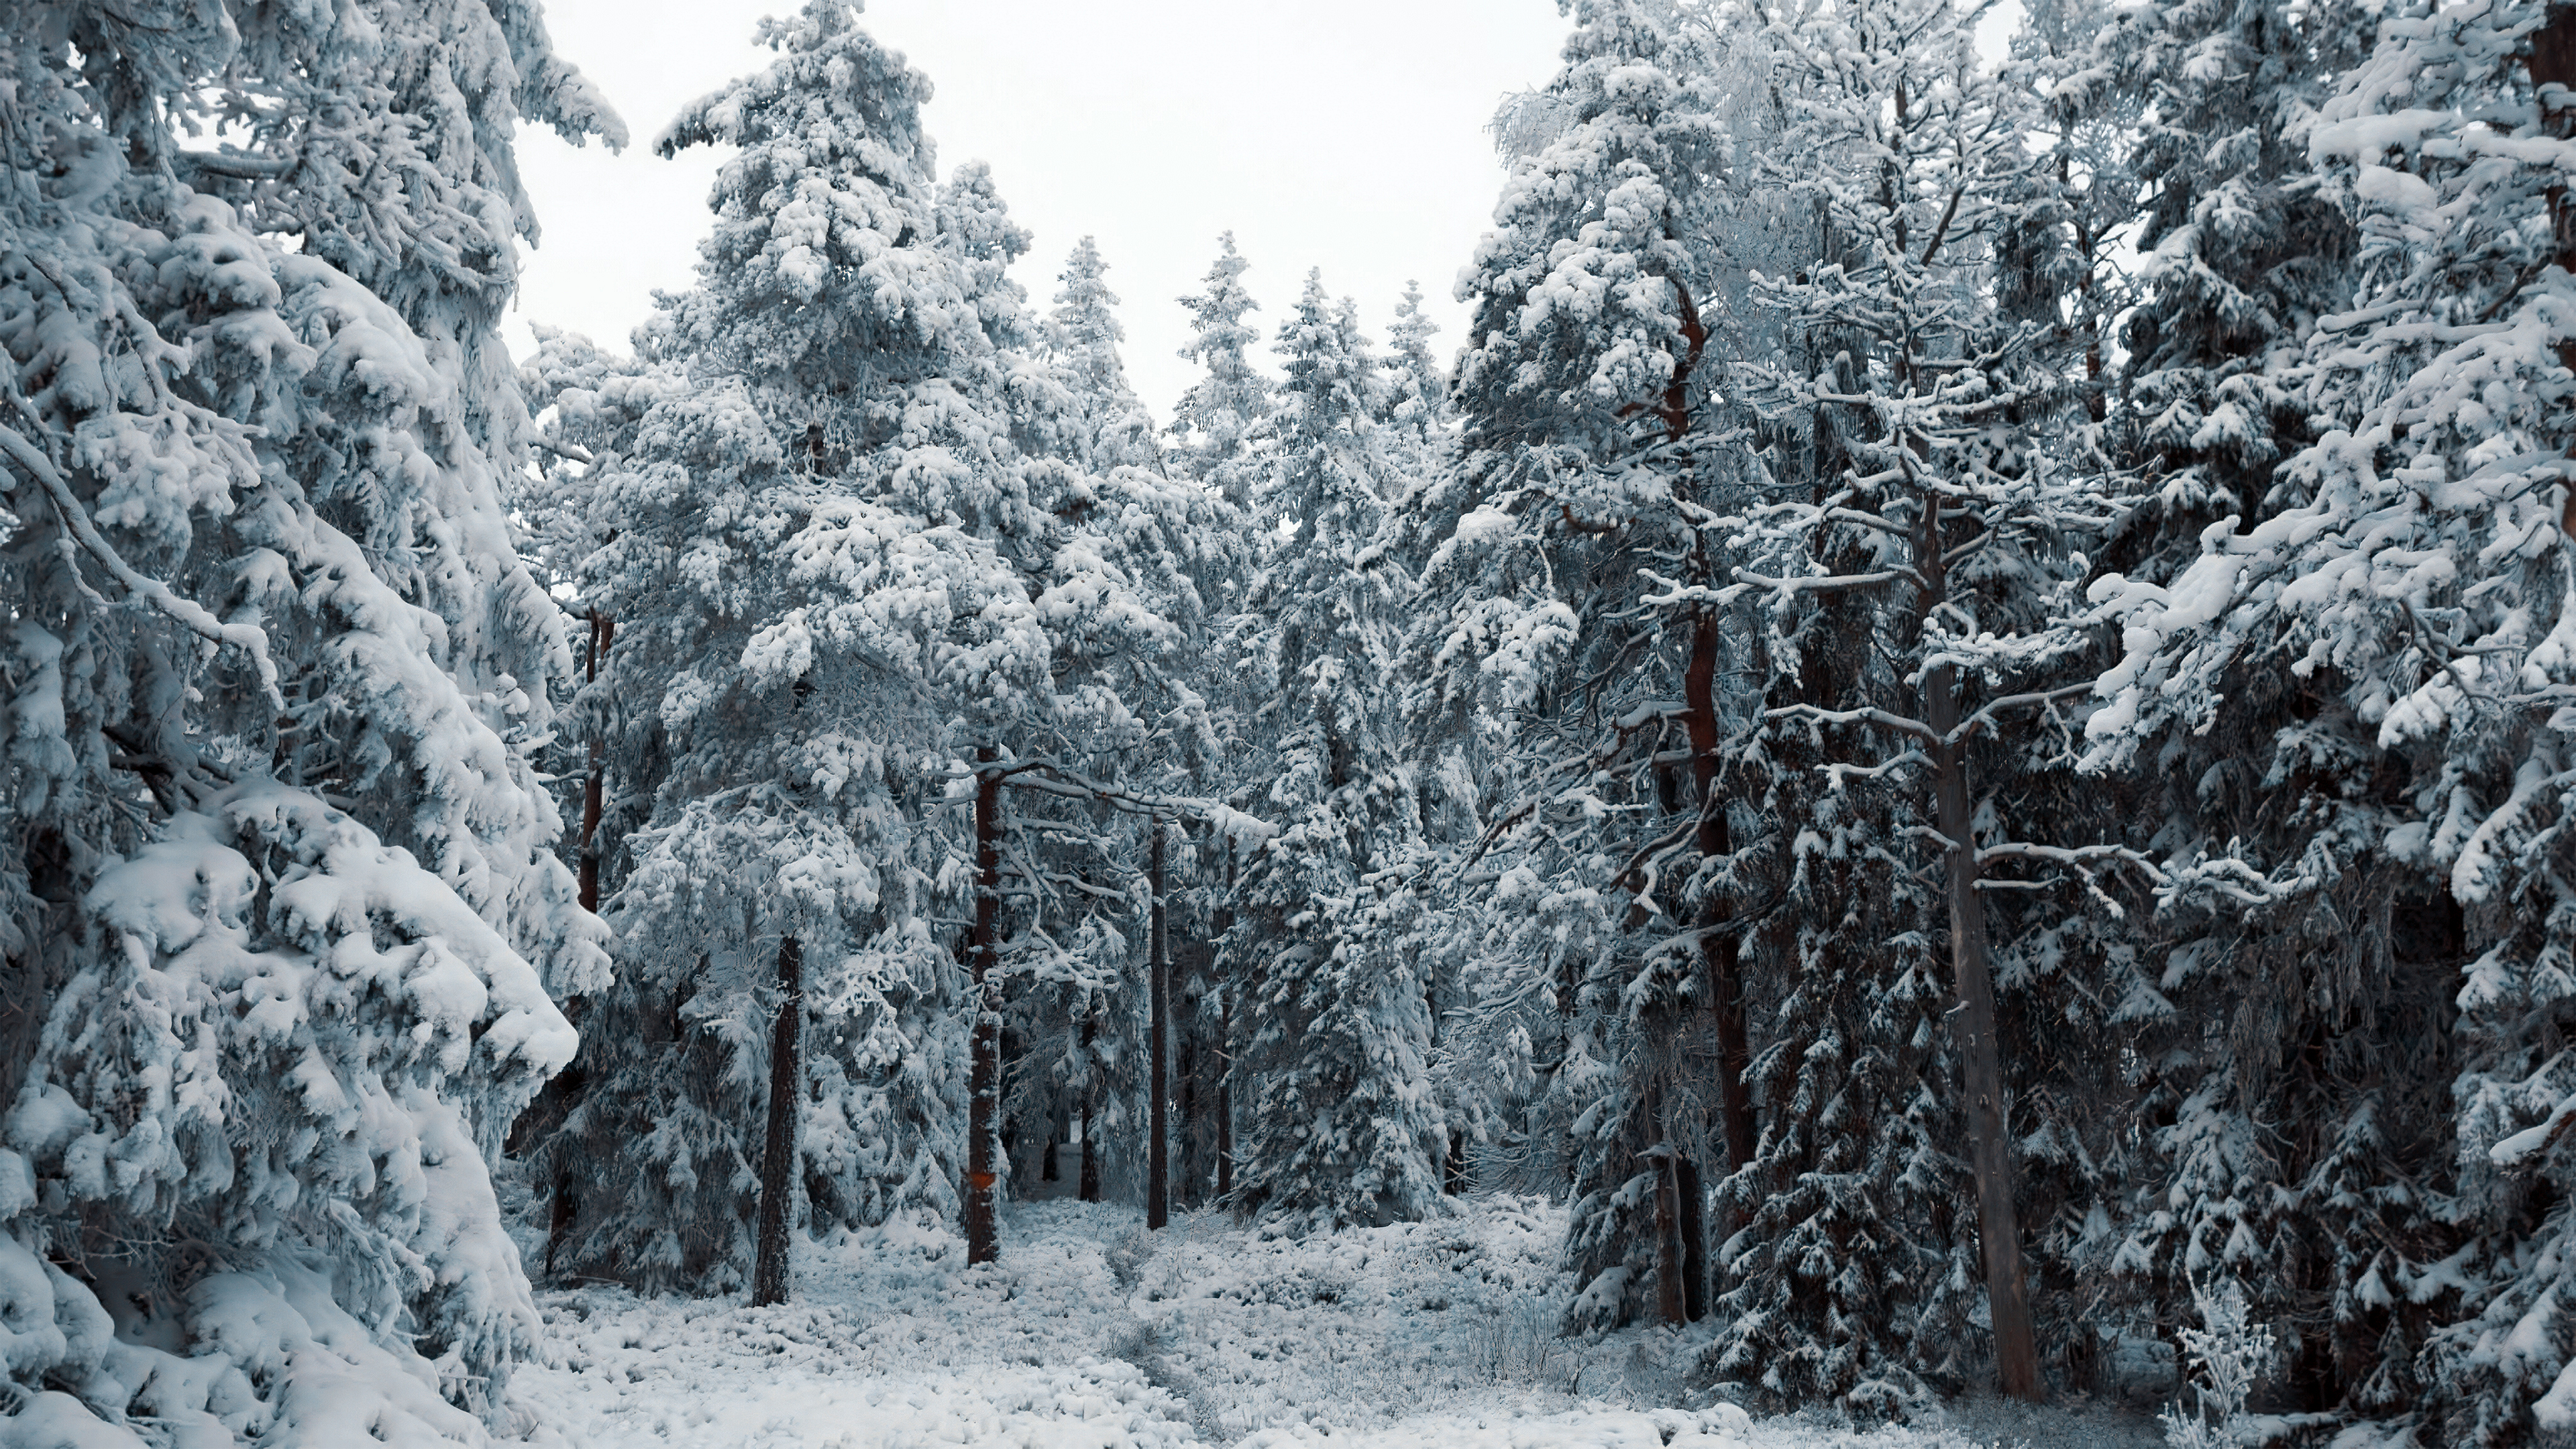 General 3840x2160 Sweden North  snow HDR winter cold pine trees snow covered trees forest nature